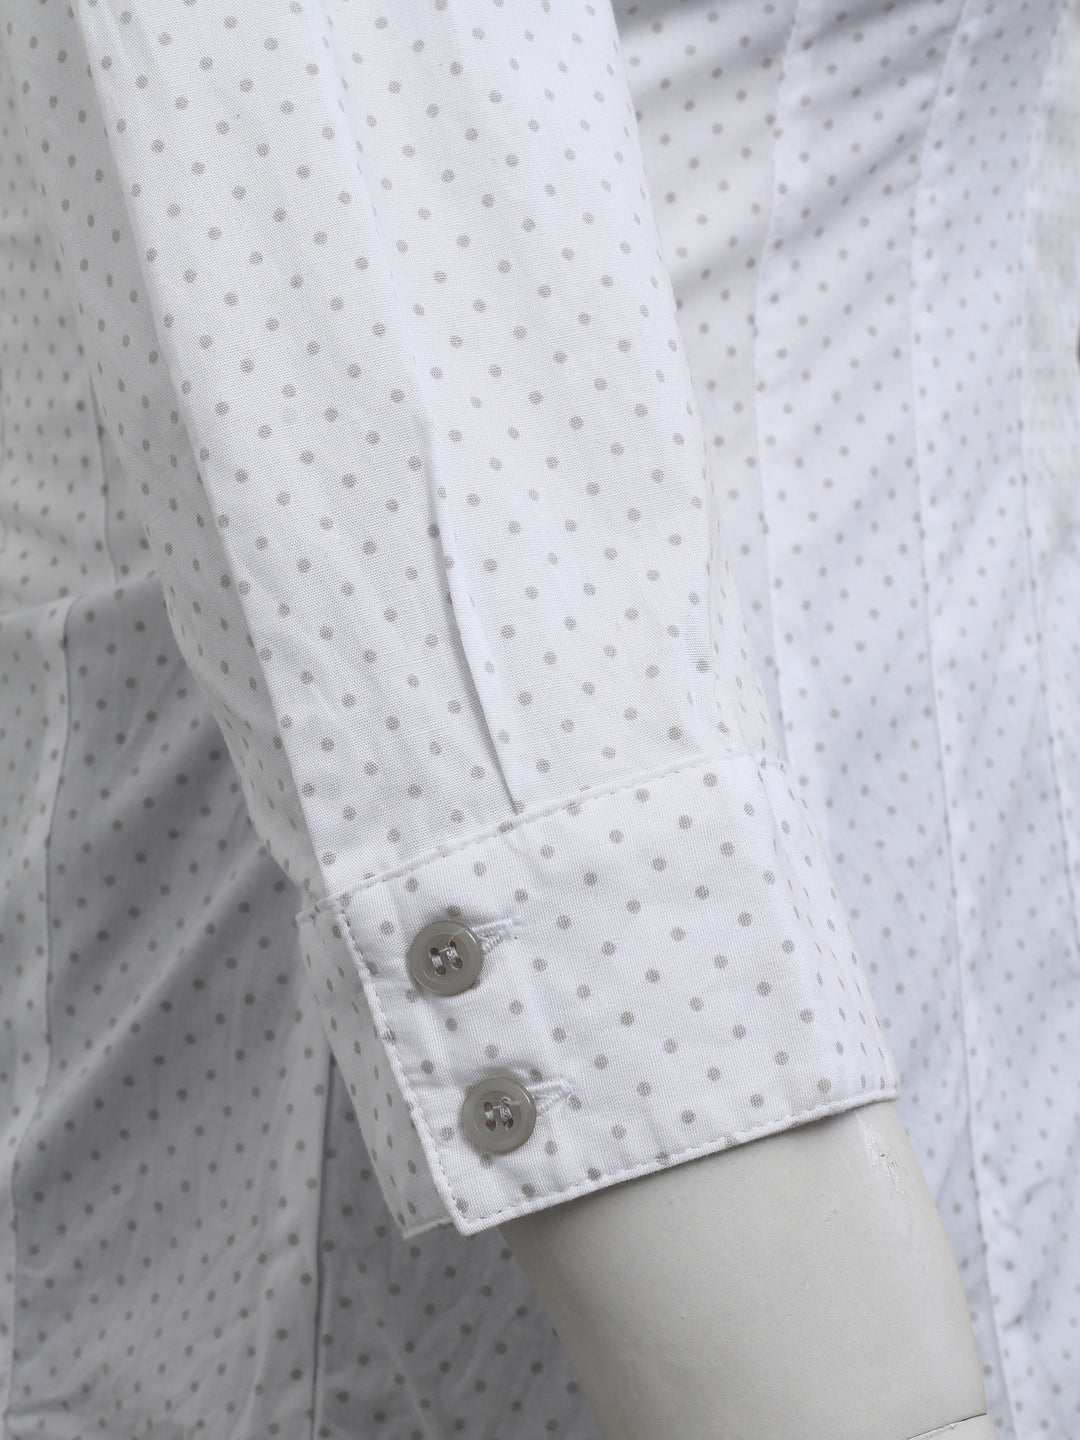 H&M Casual 3QTR Shirt With Grey Polka Dots